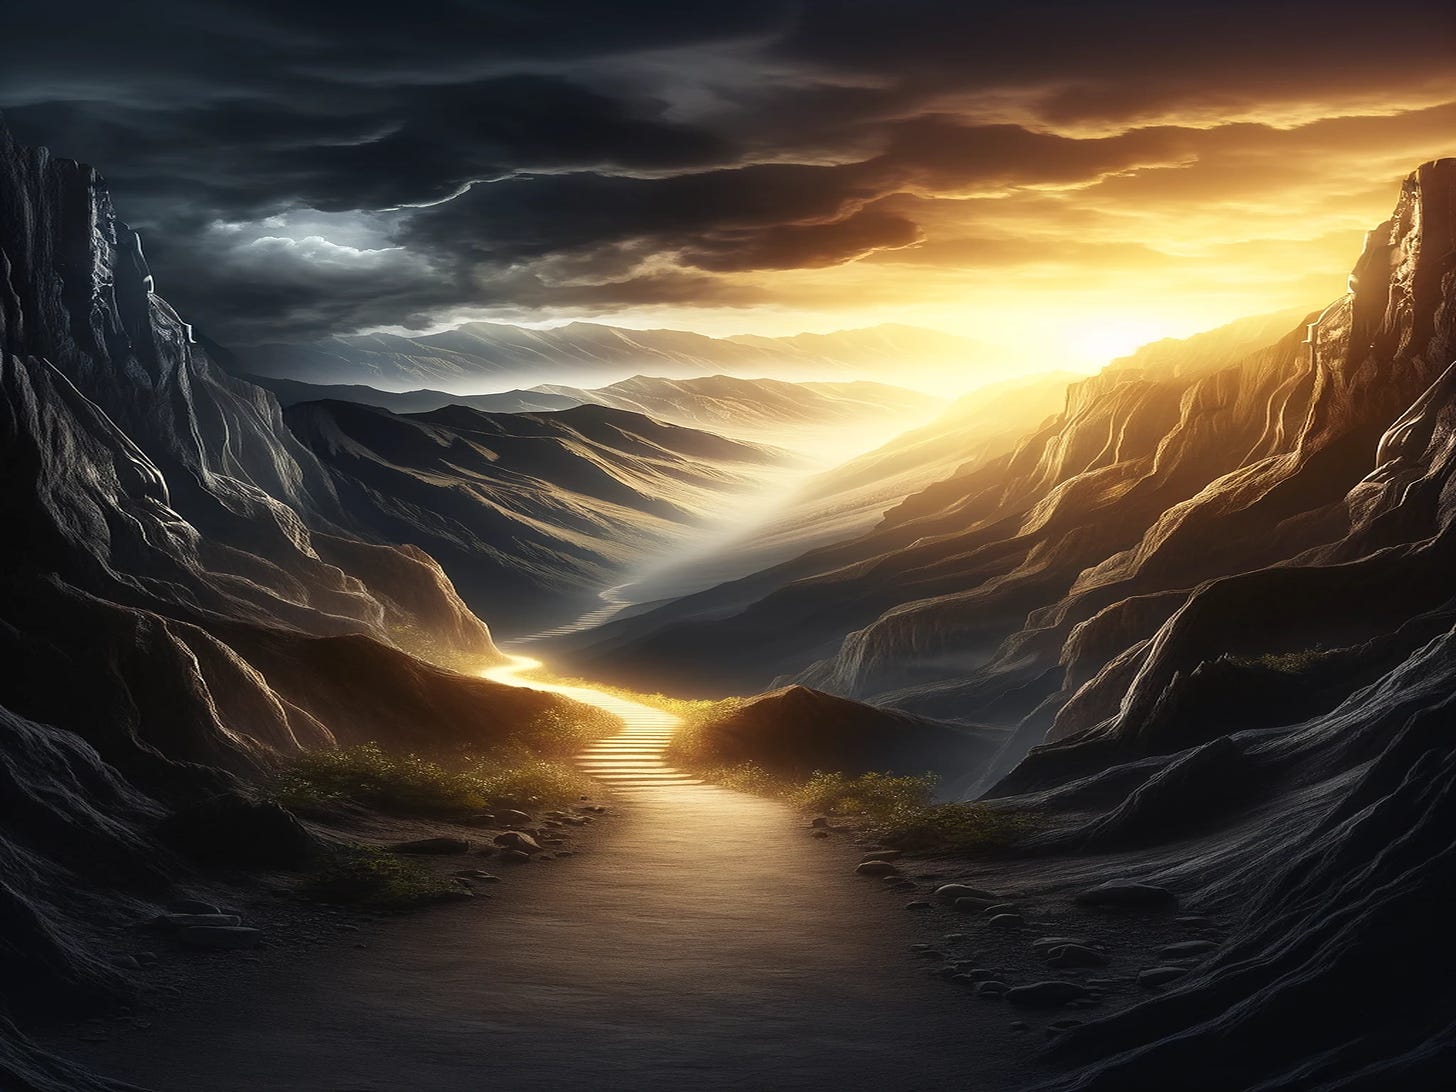 A dramatic digital landscape depicting a sunlit path winding through towering, shadowy cliffs with ominous clouds overhead, highlighting the contrast between the illuminated and darkened aspects of the terrain.